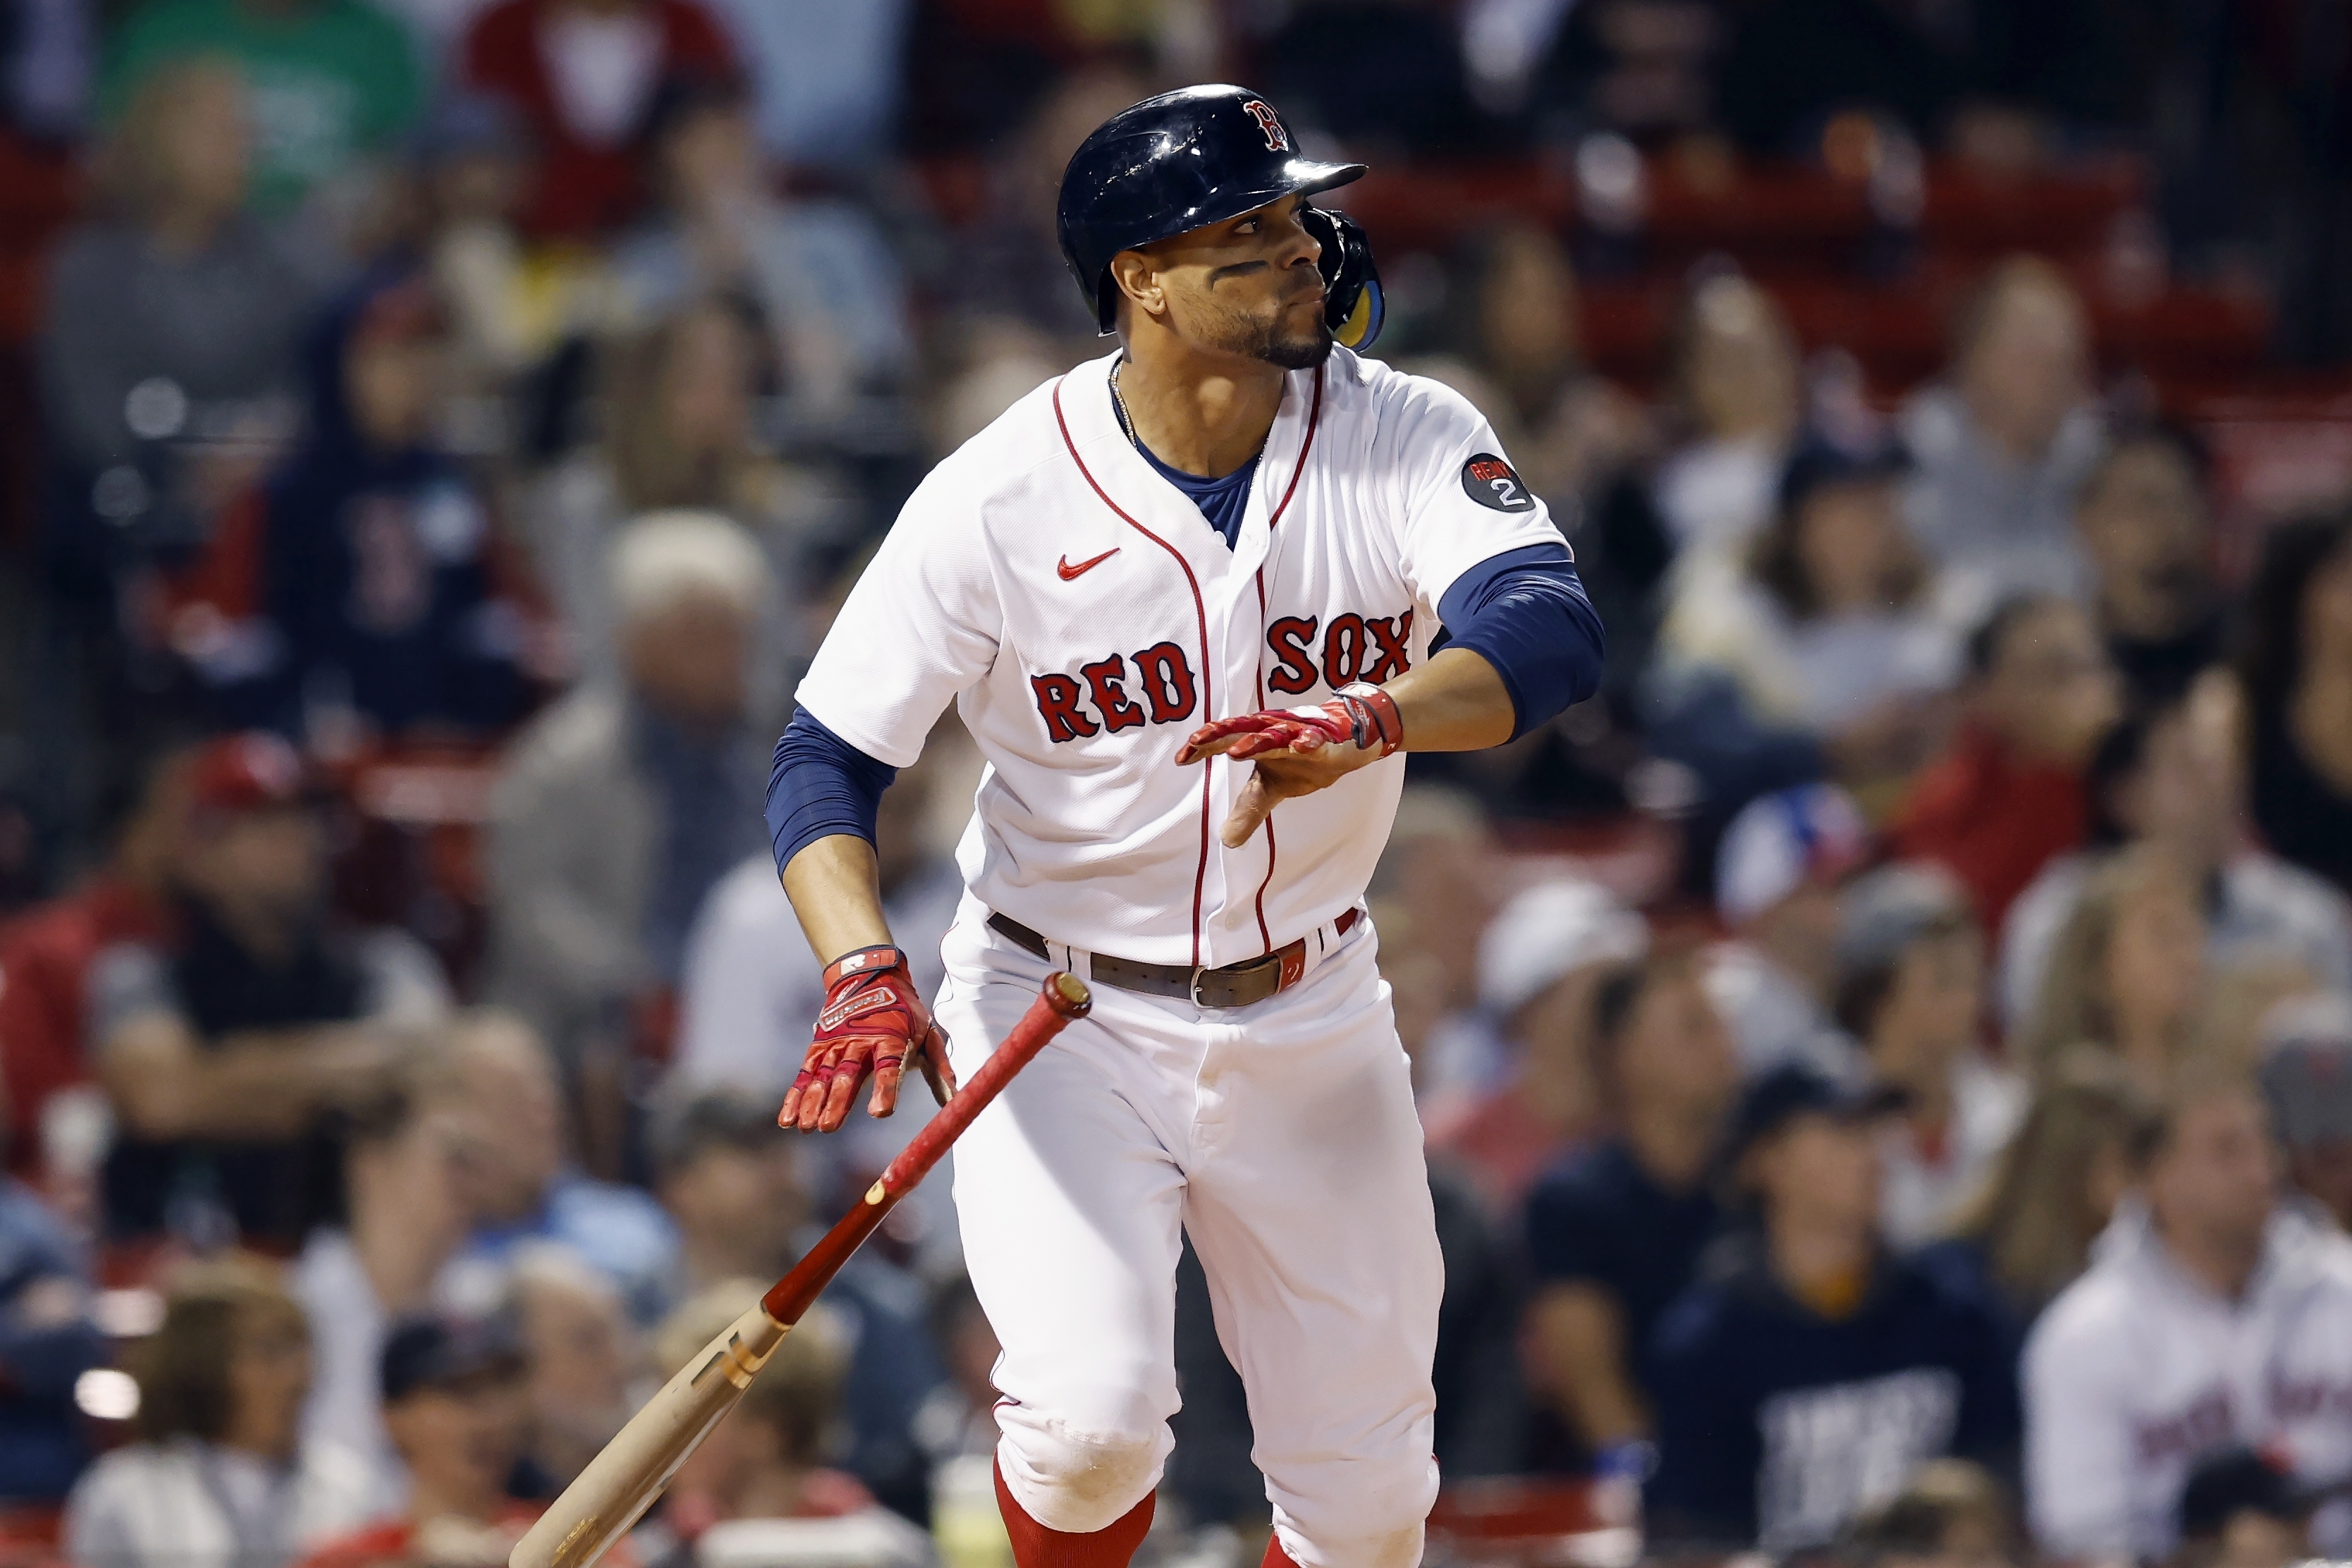 Why Xander Bogaerts' diminished power in 2022 won't impact contract